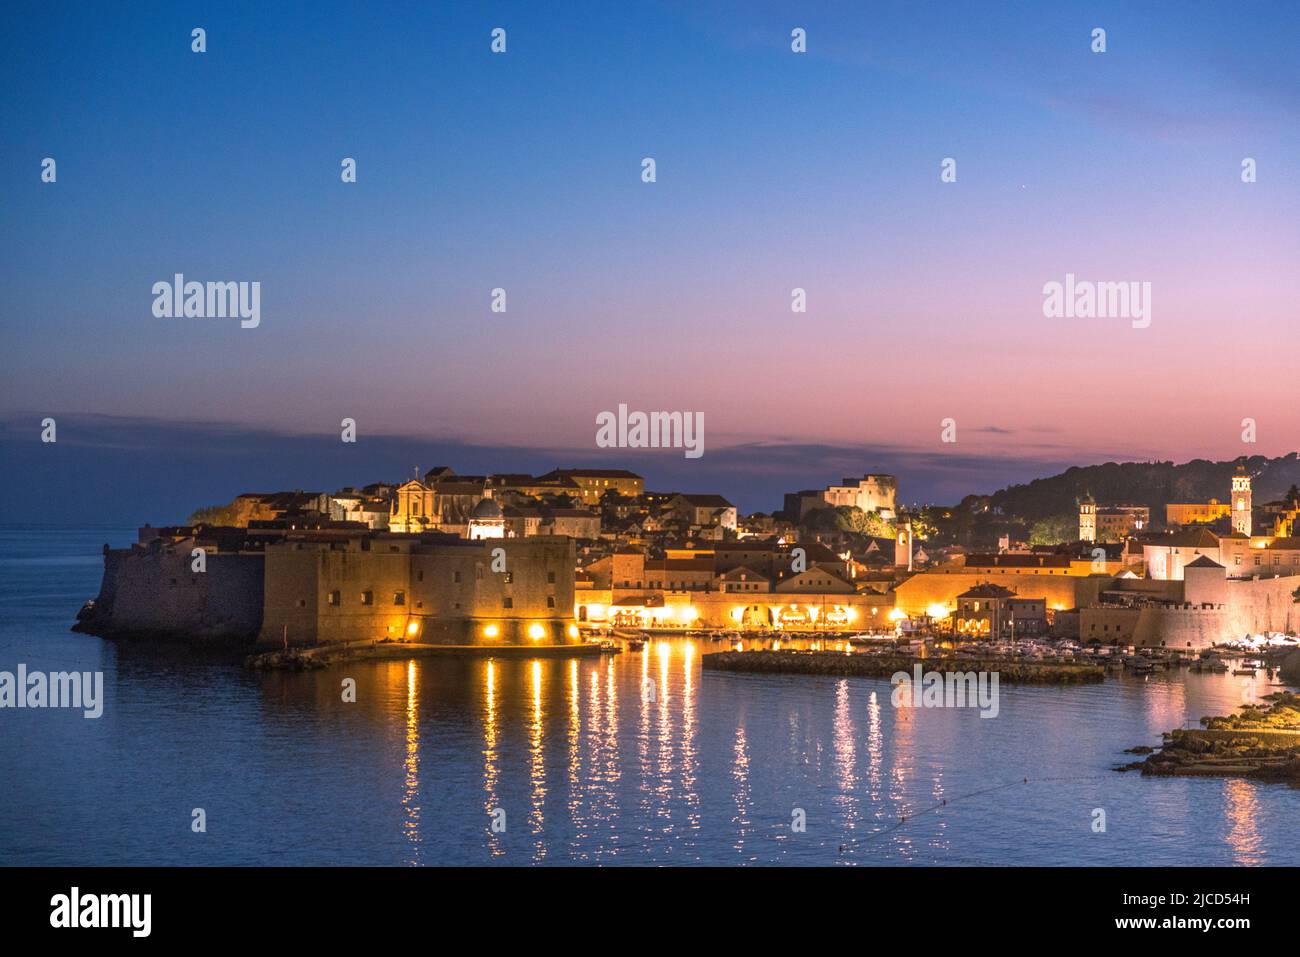 Sunset View of Old Town, Dubrovnik, Croatia Stock Photo